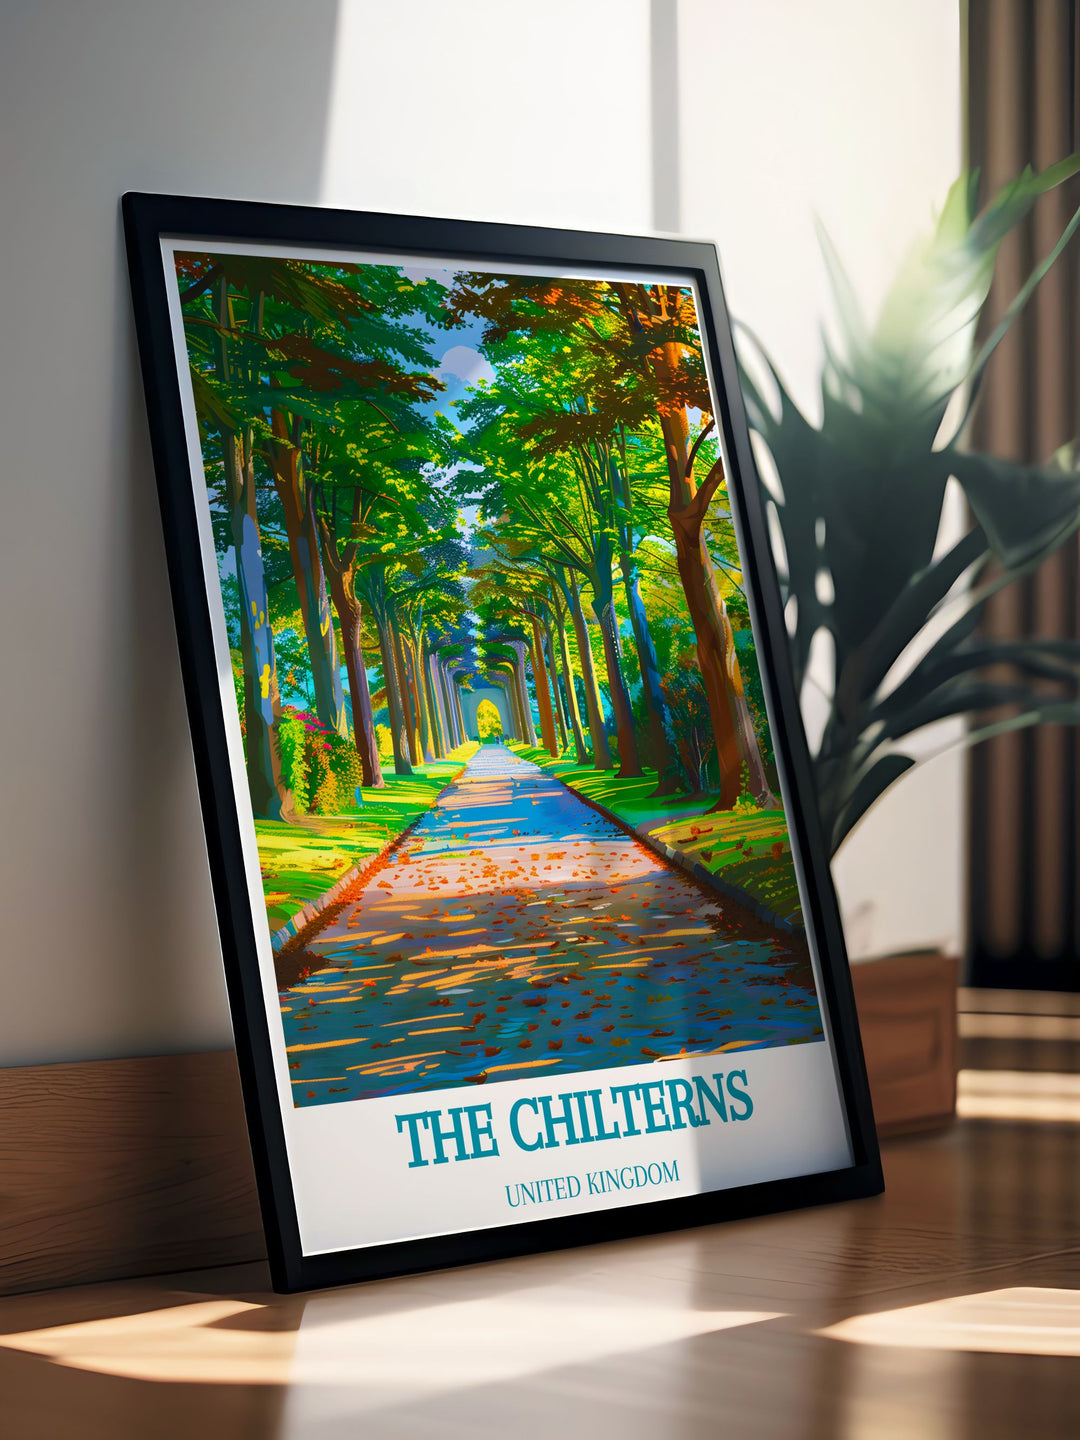 United Kingdom Prints celebrating the timeless charm of the British countryside with vintage inspired designs, offering a glimpse into the rich history and natural beauty of The Chilterns and beyond.